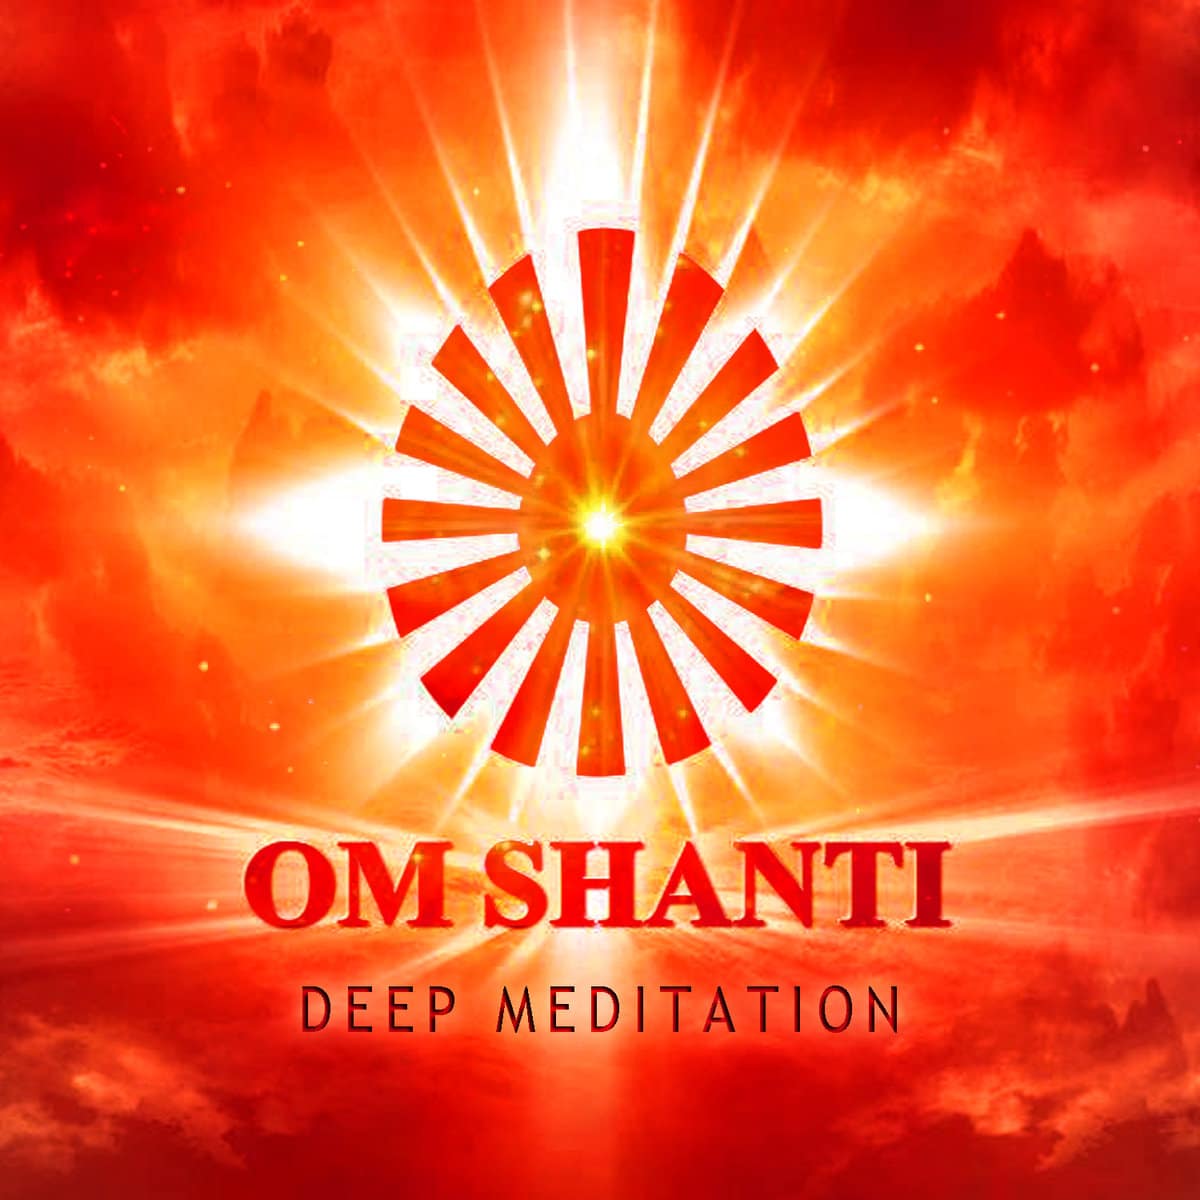 You are currently viewing Om Shanti Mantra Meditation